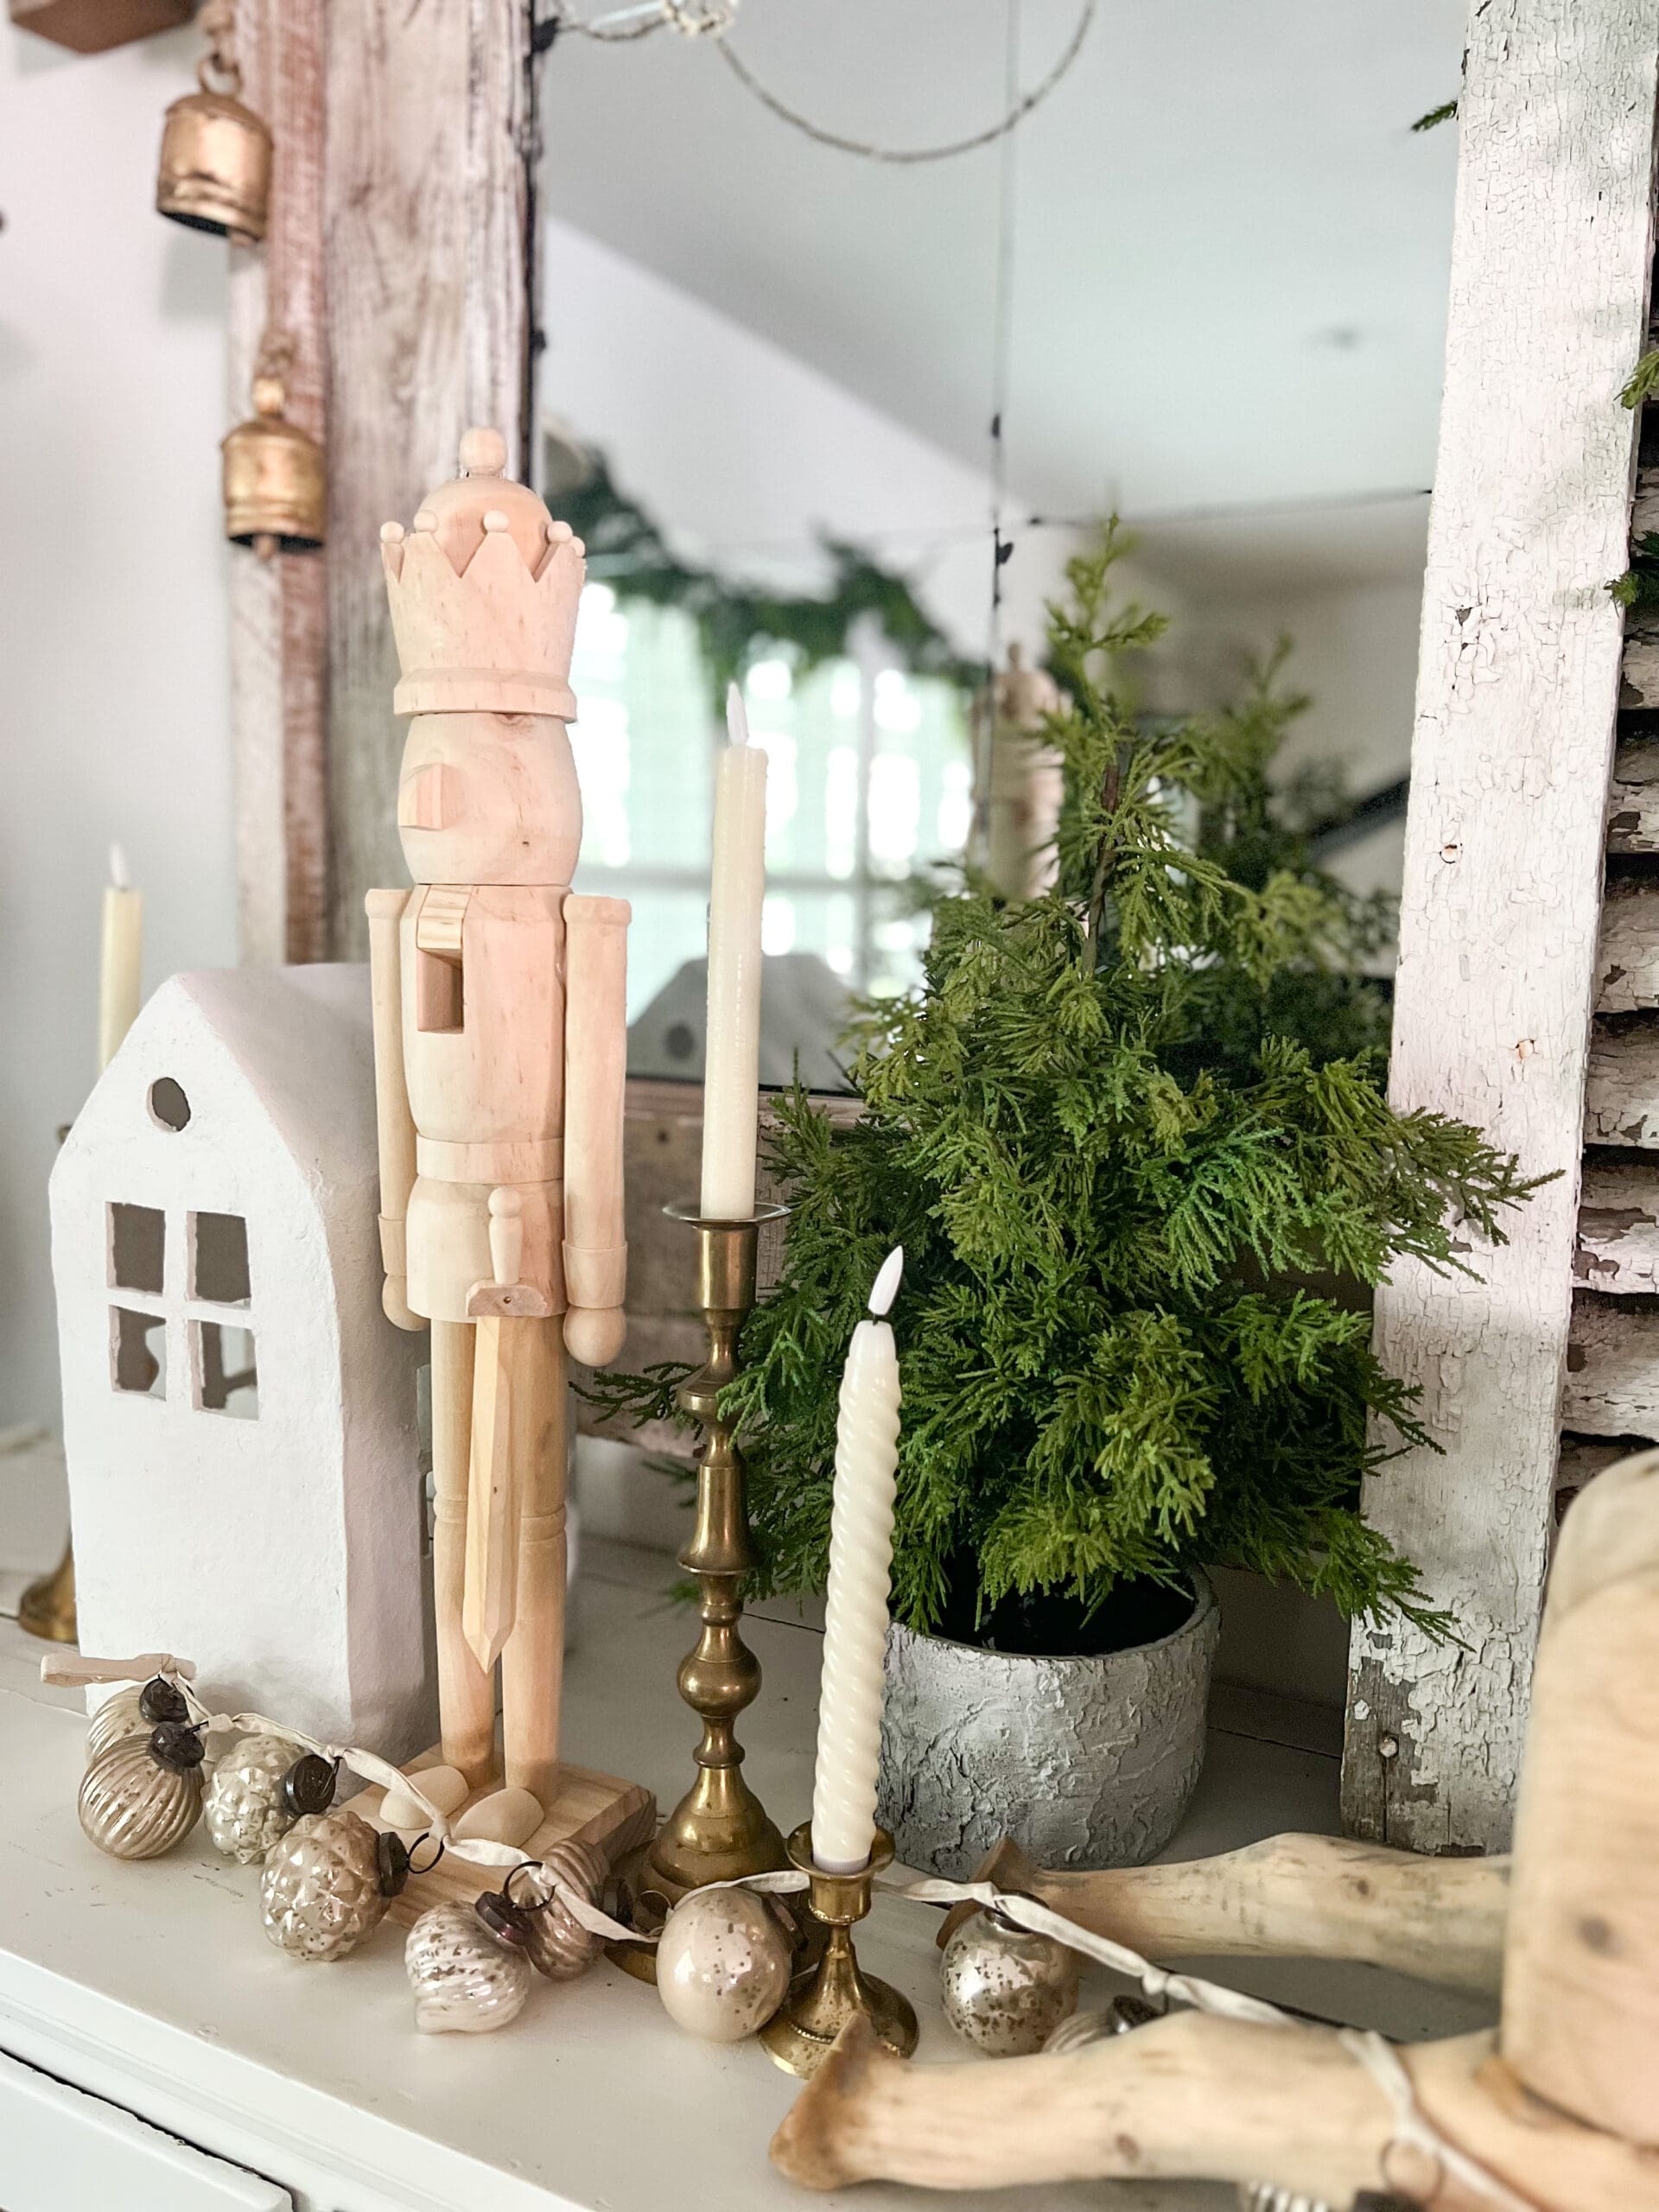 large wooden nutcracker next to a small white house and a little Christmas tree as well as golden candlesticks